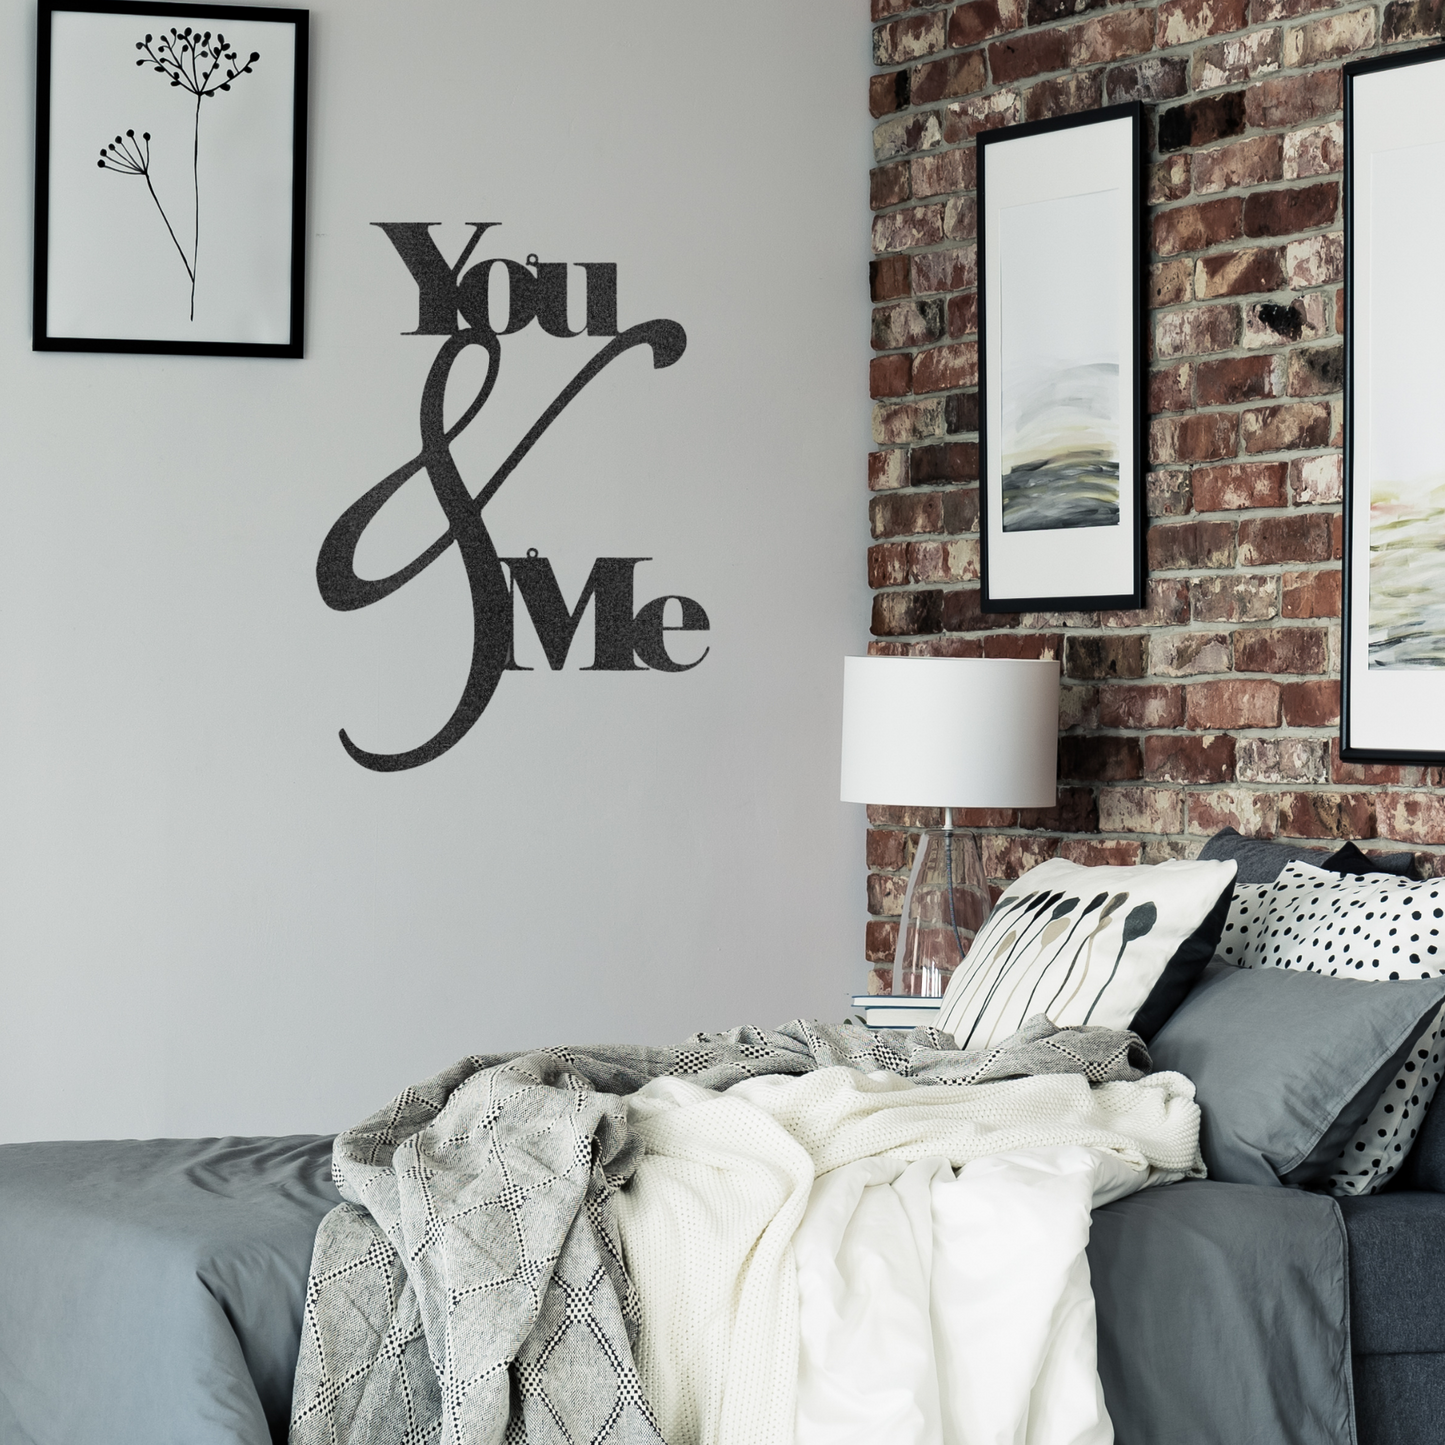 "You & Me", You and Me Script , Custom Metal Wall Art, Metal Words, Metal Home Decor, Together, Anniversary Gift, Wedding Gift, Valentine